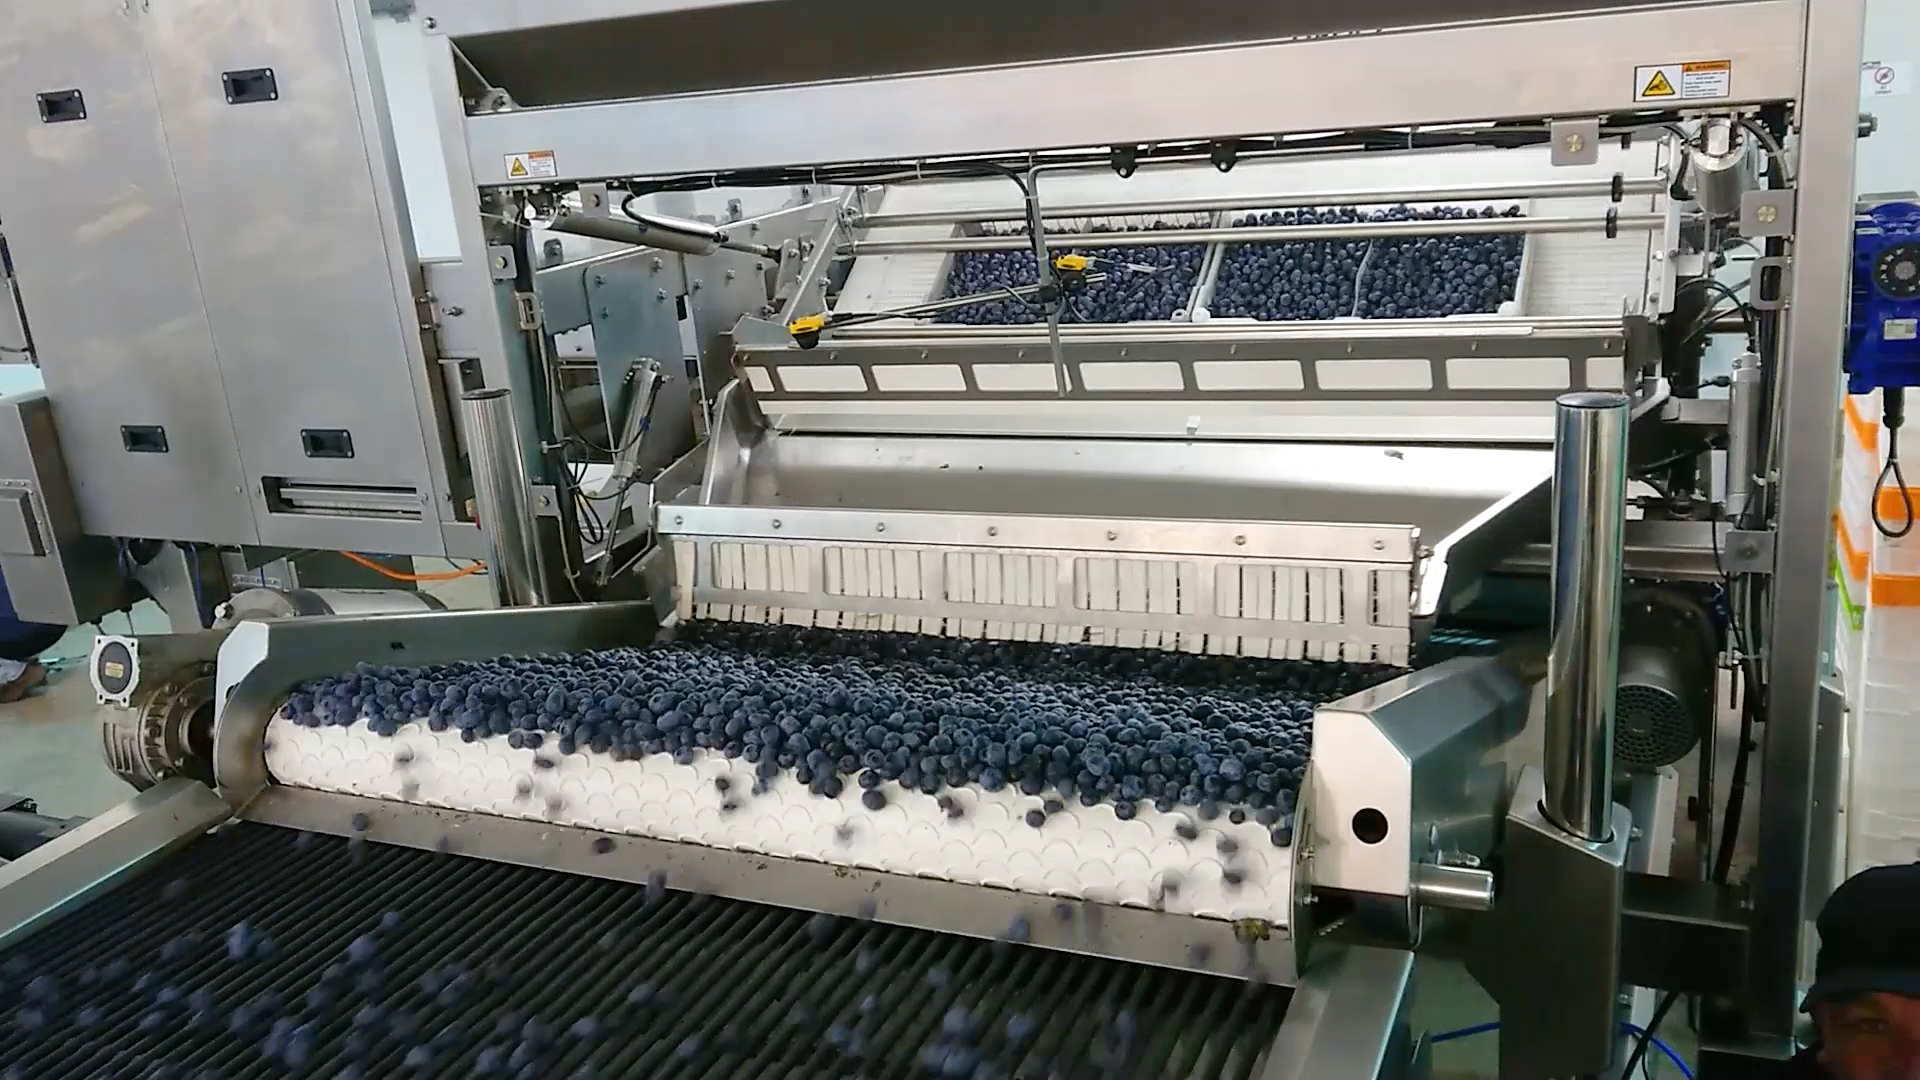 NEW TRAY TIPPER AUTOMATES FRUIT DELIVERY INTO KATO260 BLUEBERRY SORTER